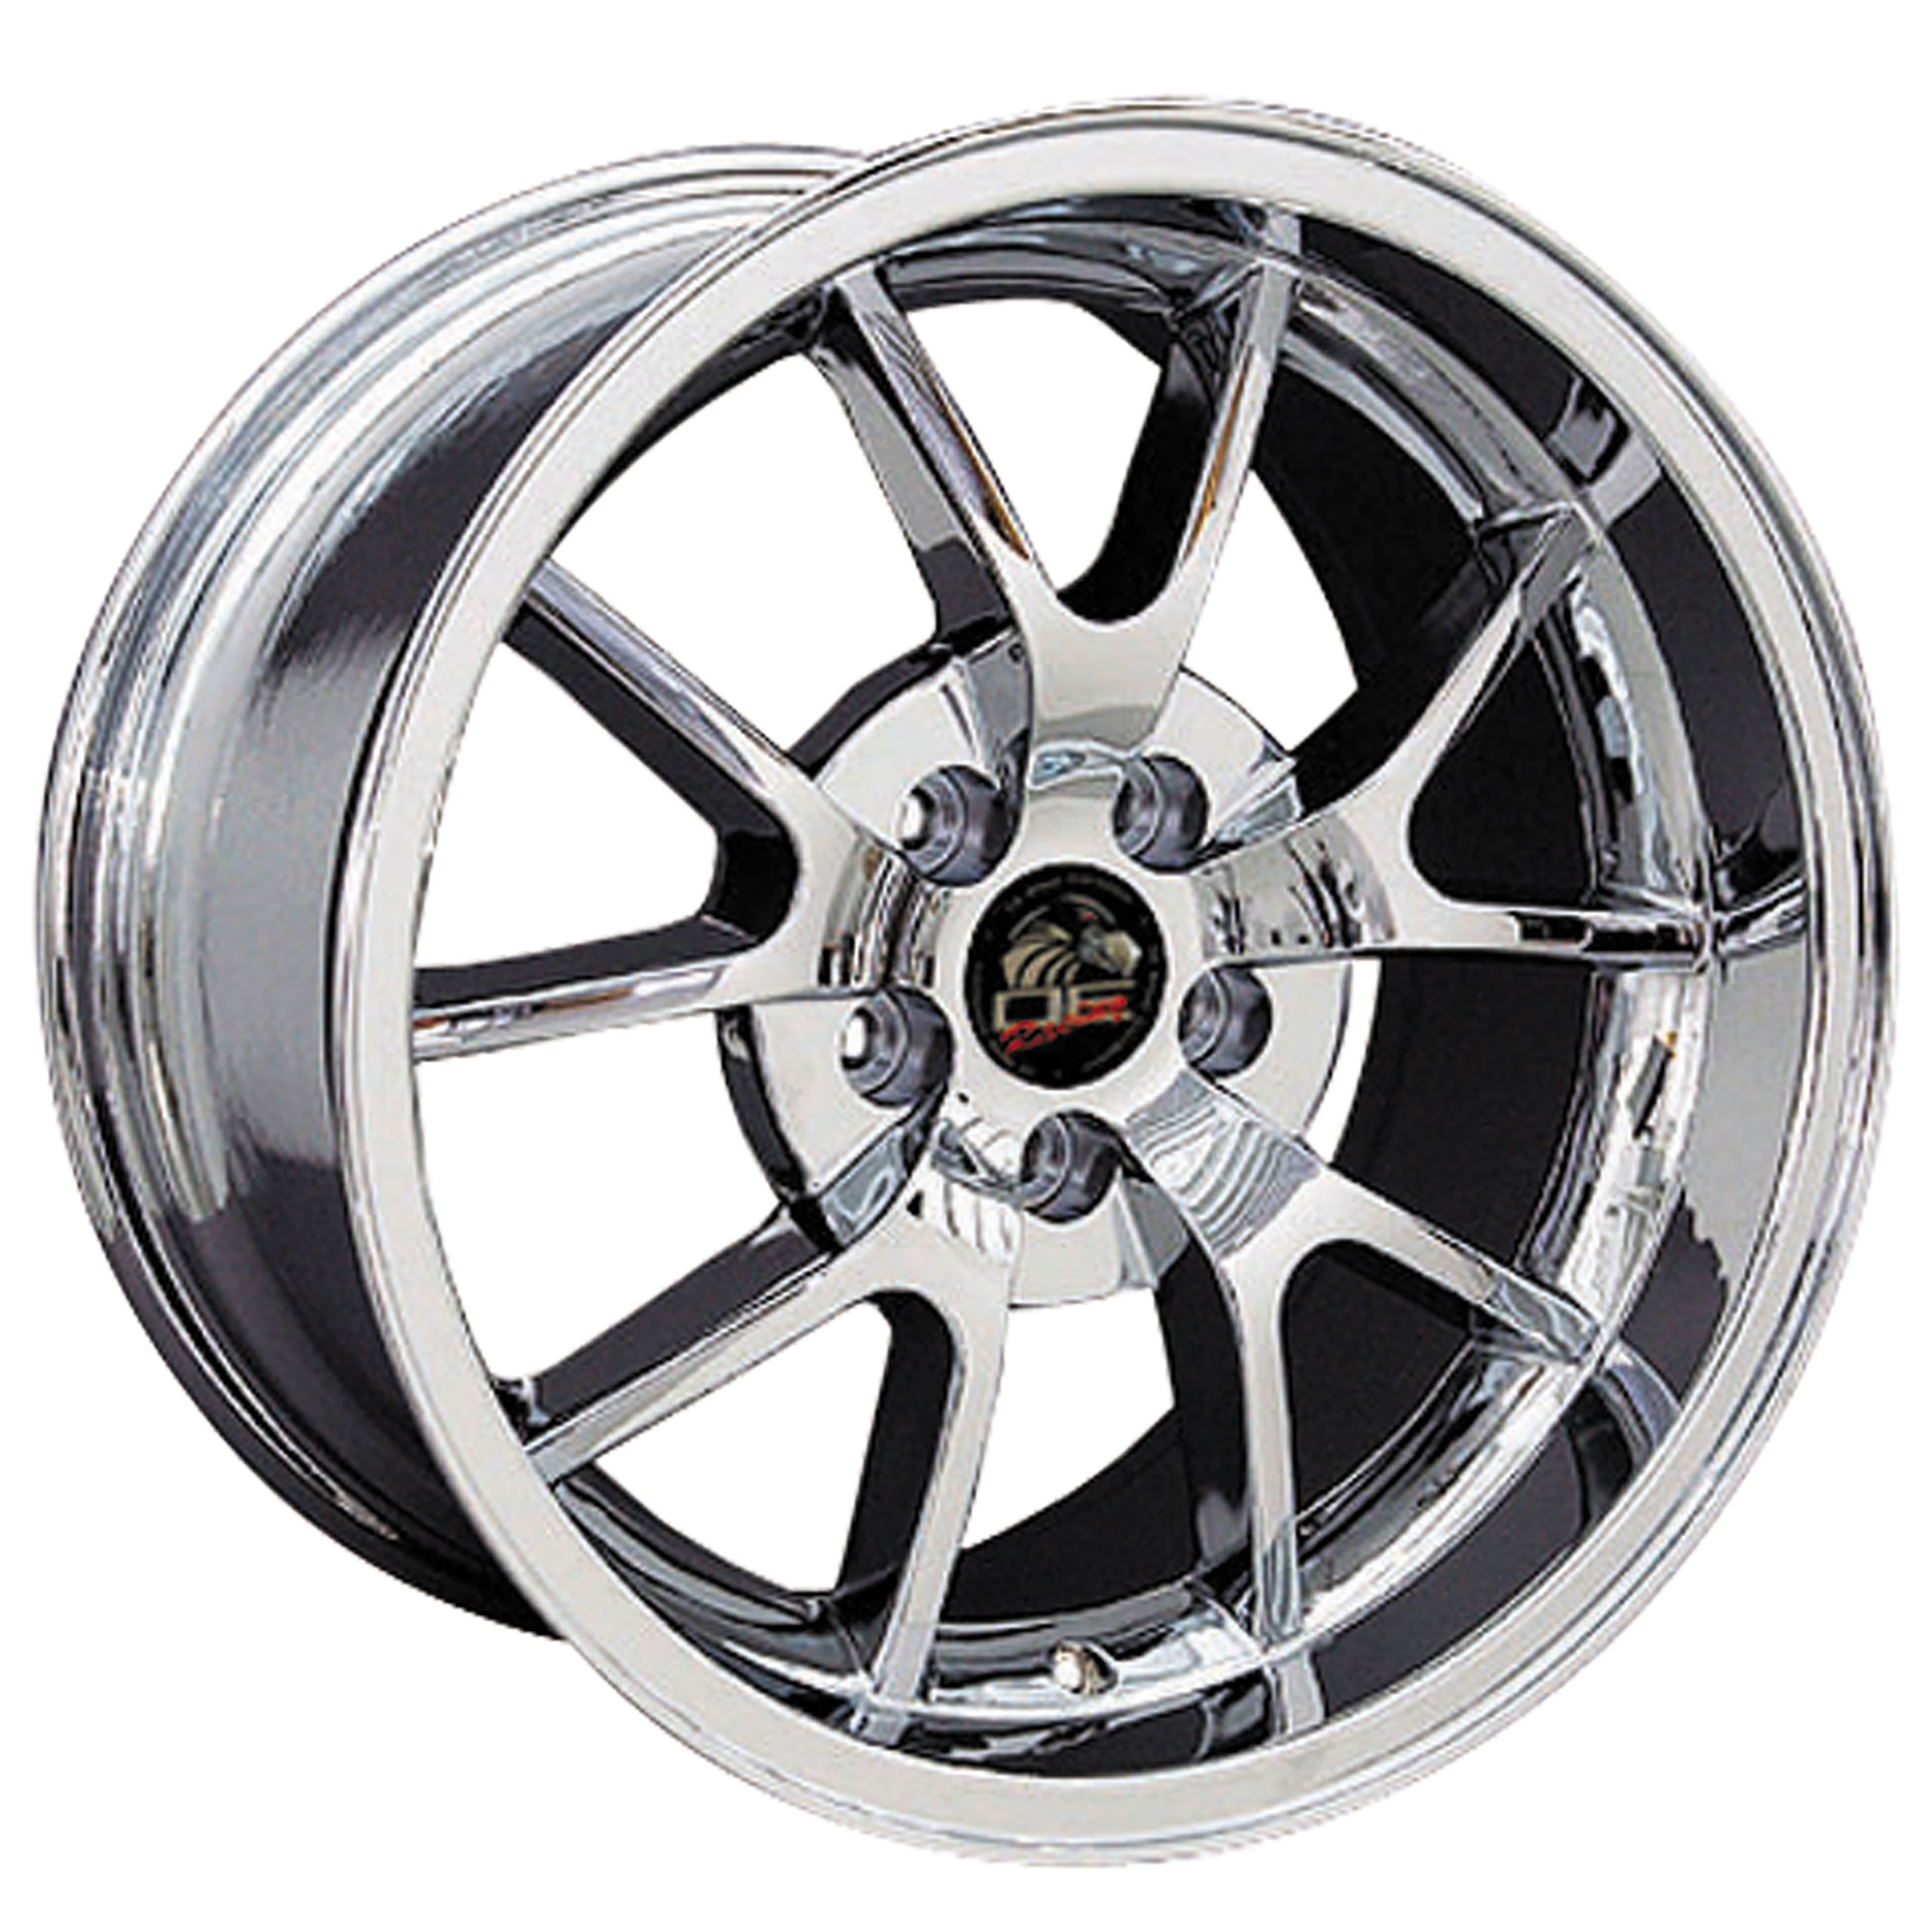 1994-2004 Ford Mustang C4-C5 FR500 Wheel - Chrome 18x10 - Rears Only CA-MA23035 